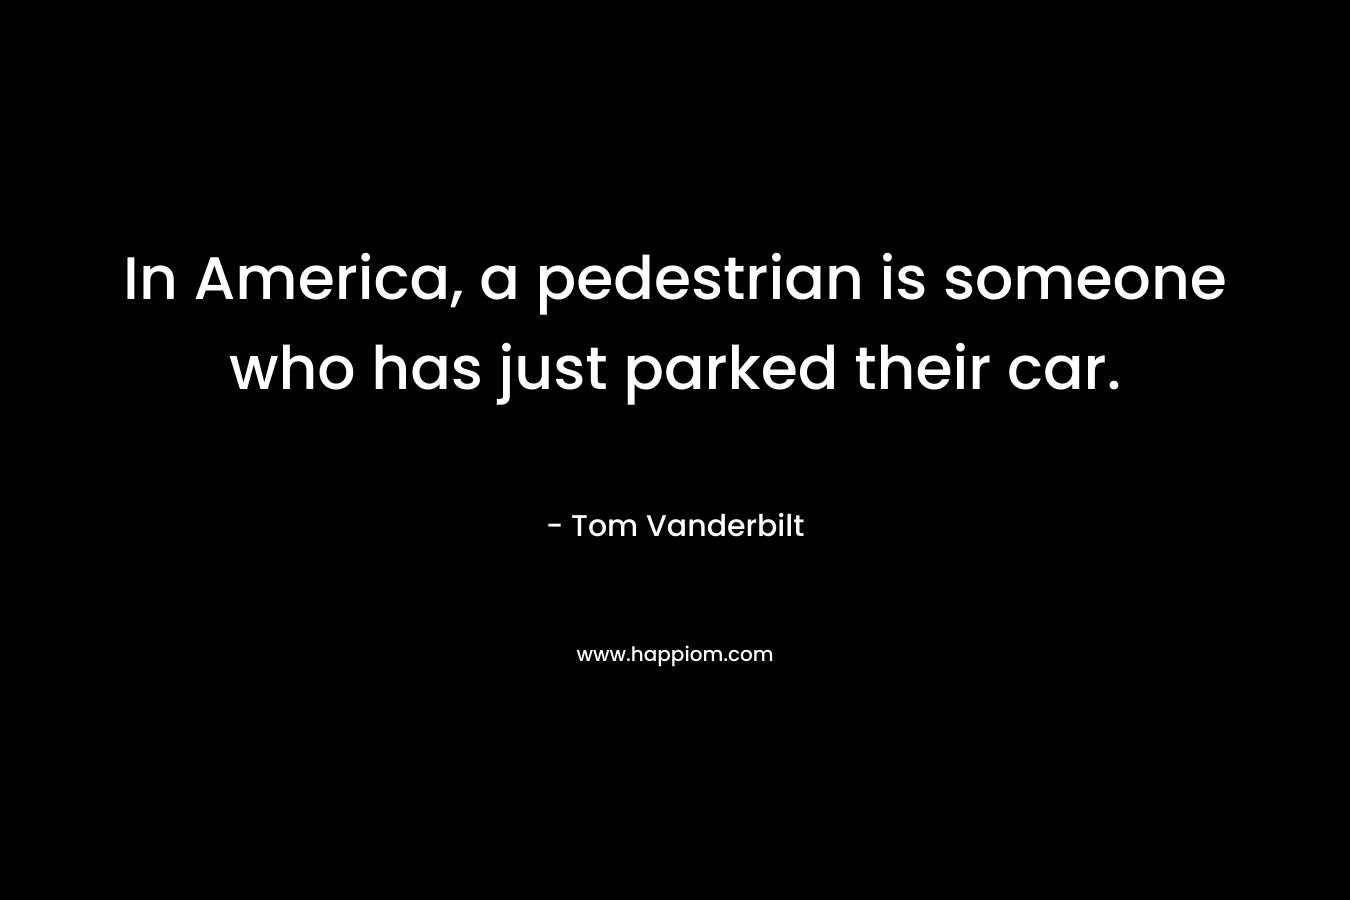 In America, a pedestrian is someone who has just parked their car. – Tom Vanderbilt